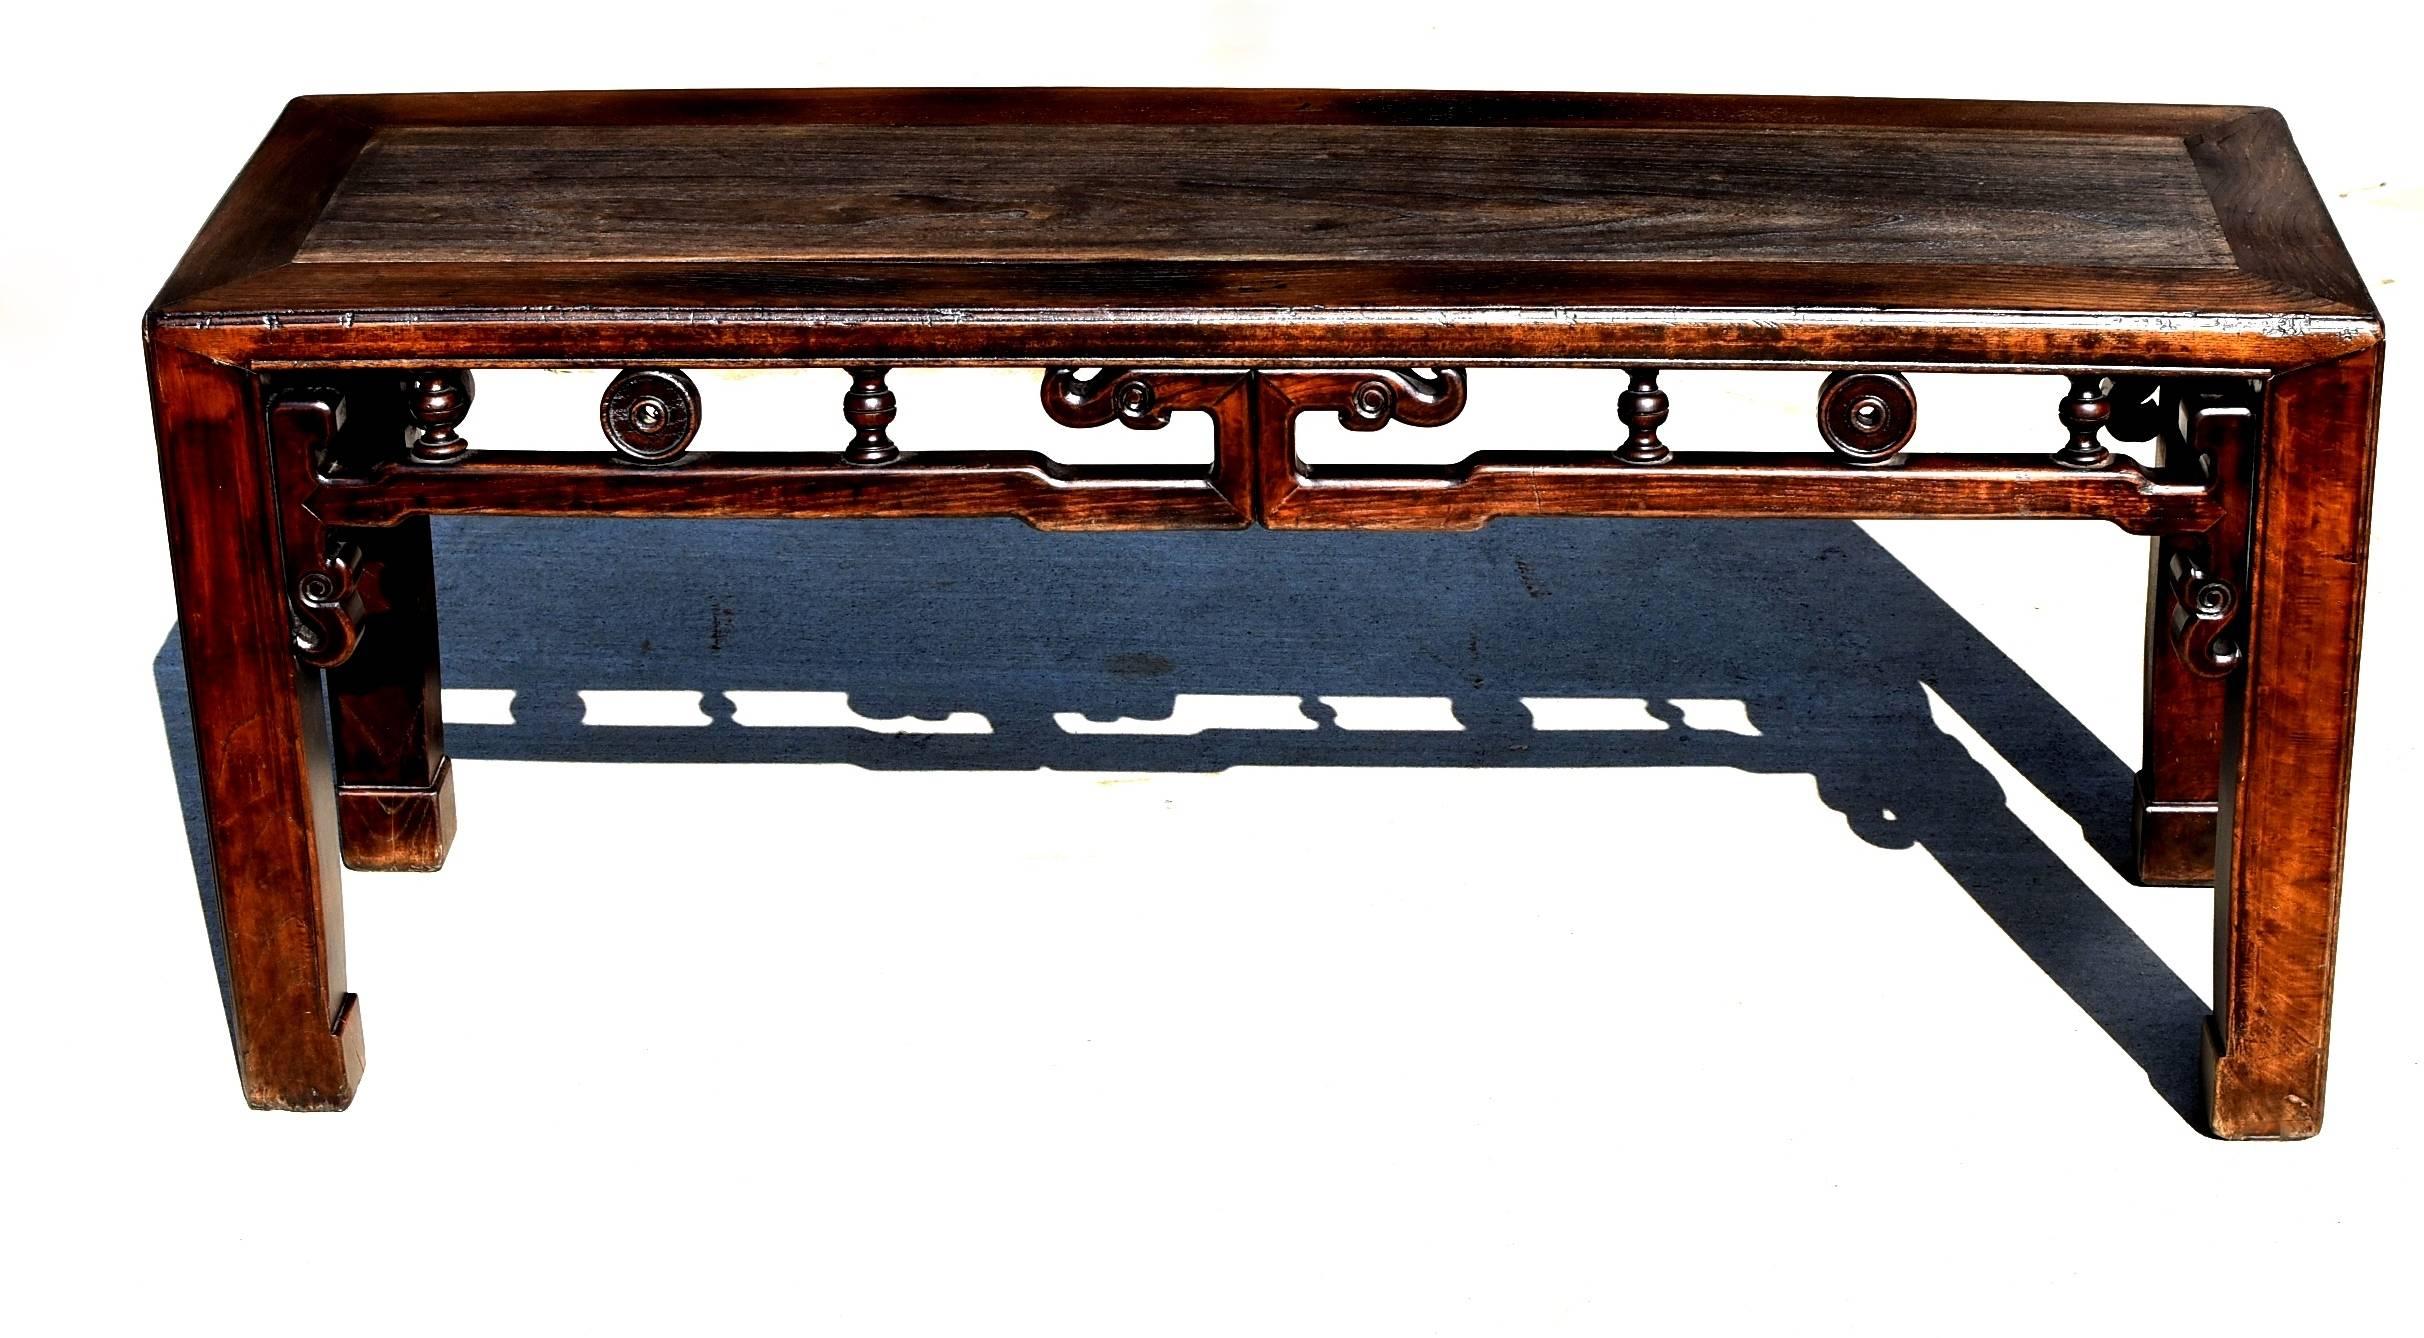 A solid wood antique Chinese spring bench.

Such a bench was made in the region south of China's Yangtze River. It is sturdy and multi-functional, often used both as seating and a table. The bench is finished on all sides, featuring the